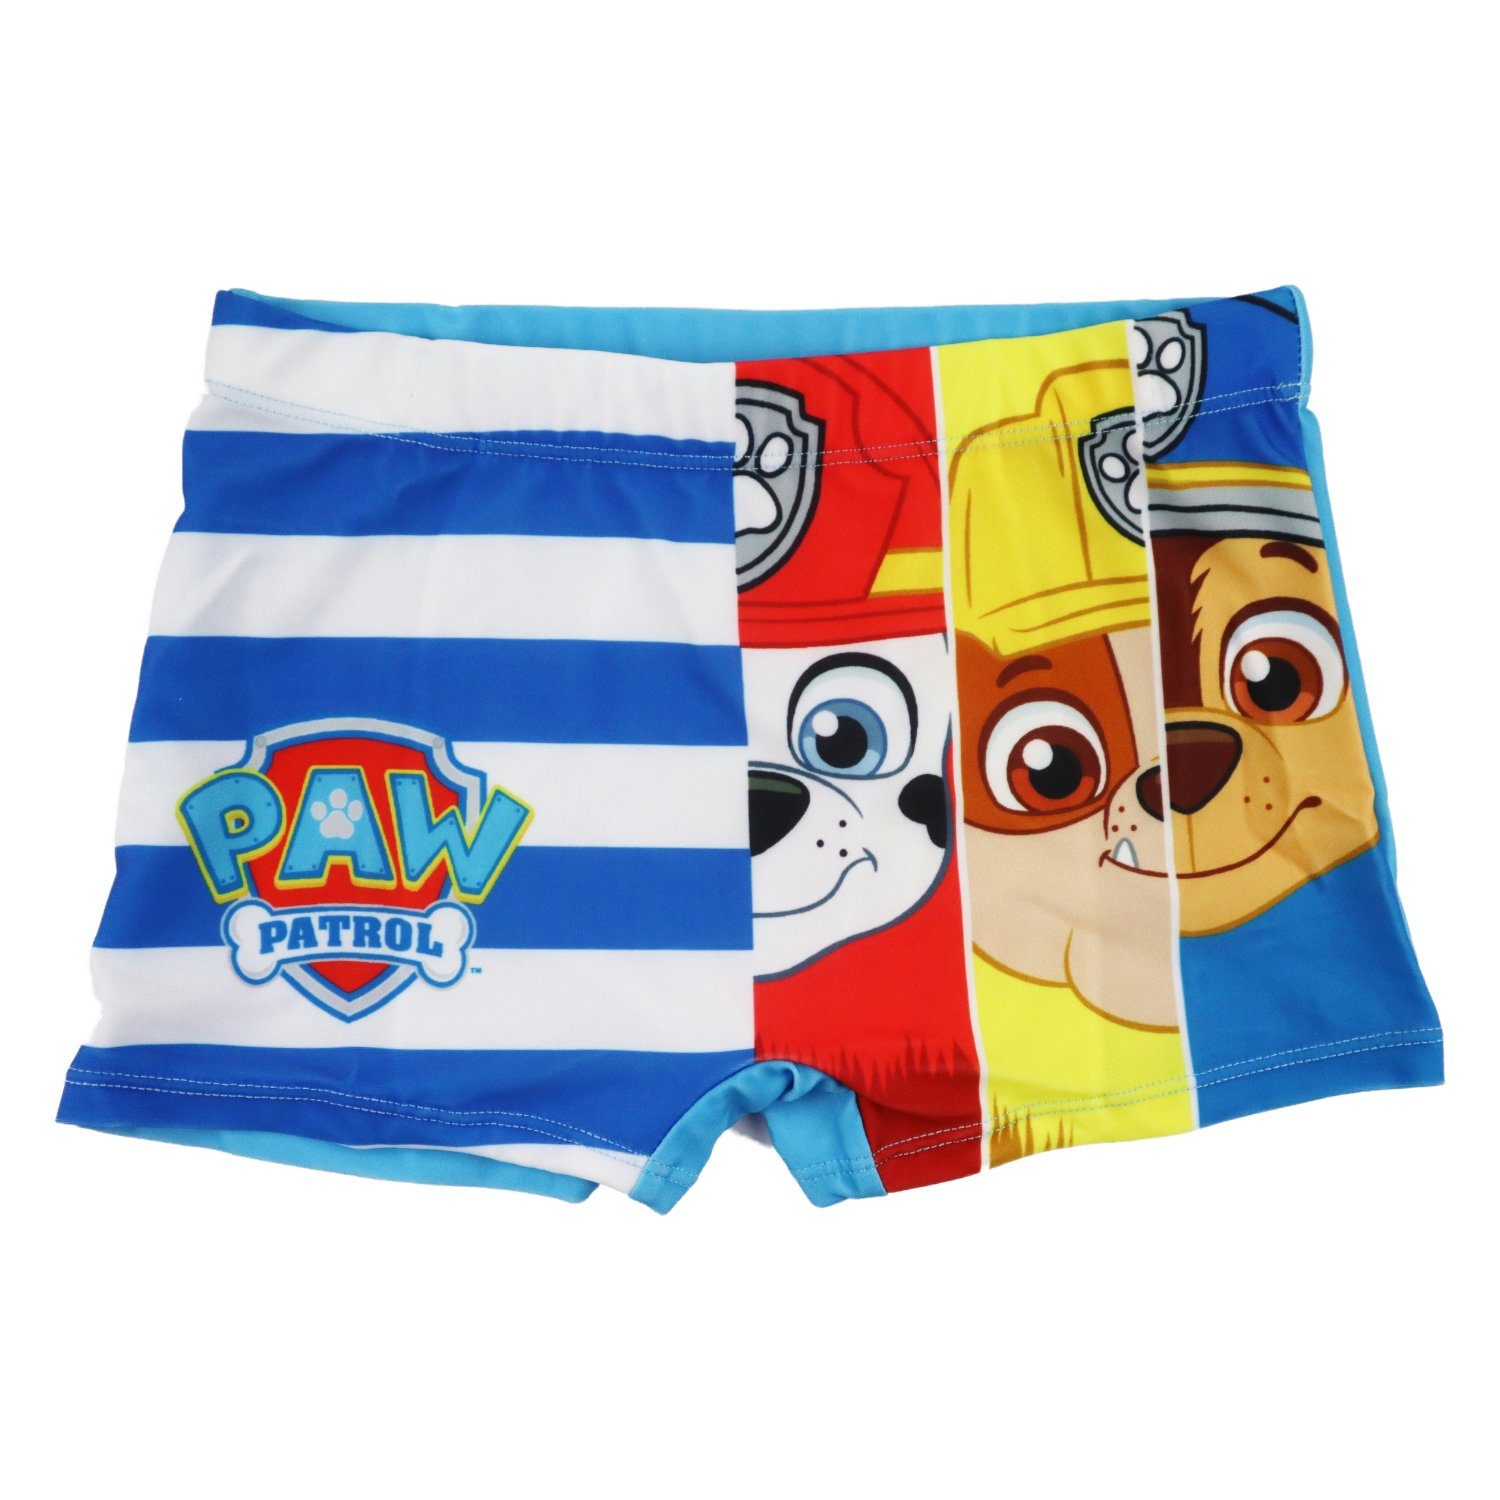 PAW PATROL Badehose Paw Patrol Chase Rubble Marshall Kinder Jungen Schwimmhose Gr. 98 bis 128